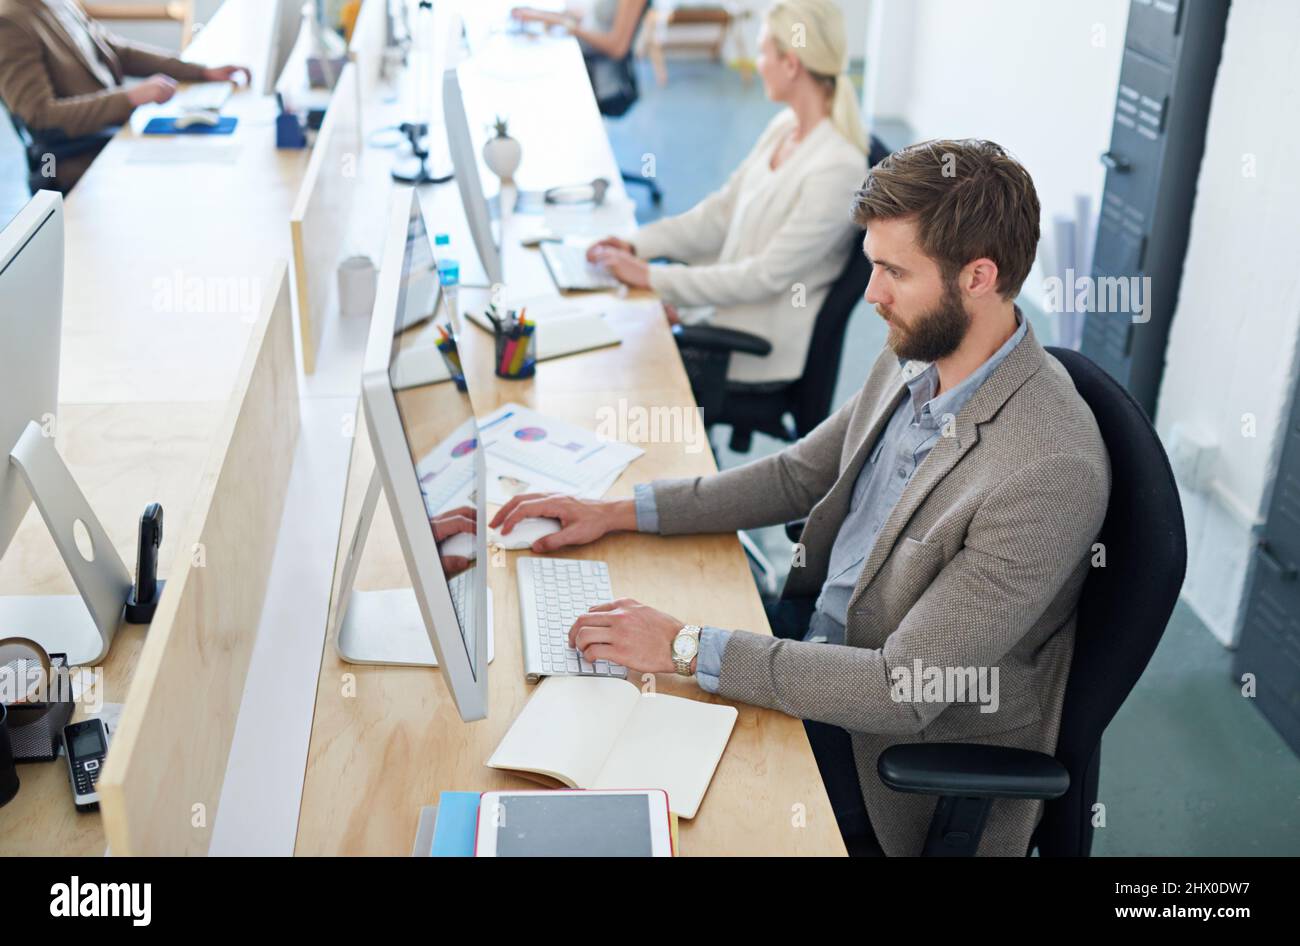 Totally focused on his work. Shot of a designer at work in an office. Stock Photo